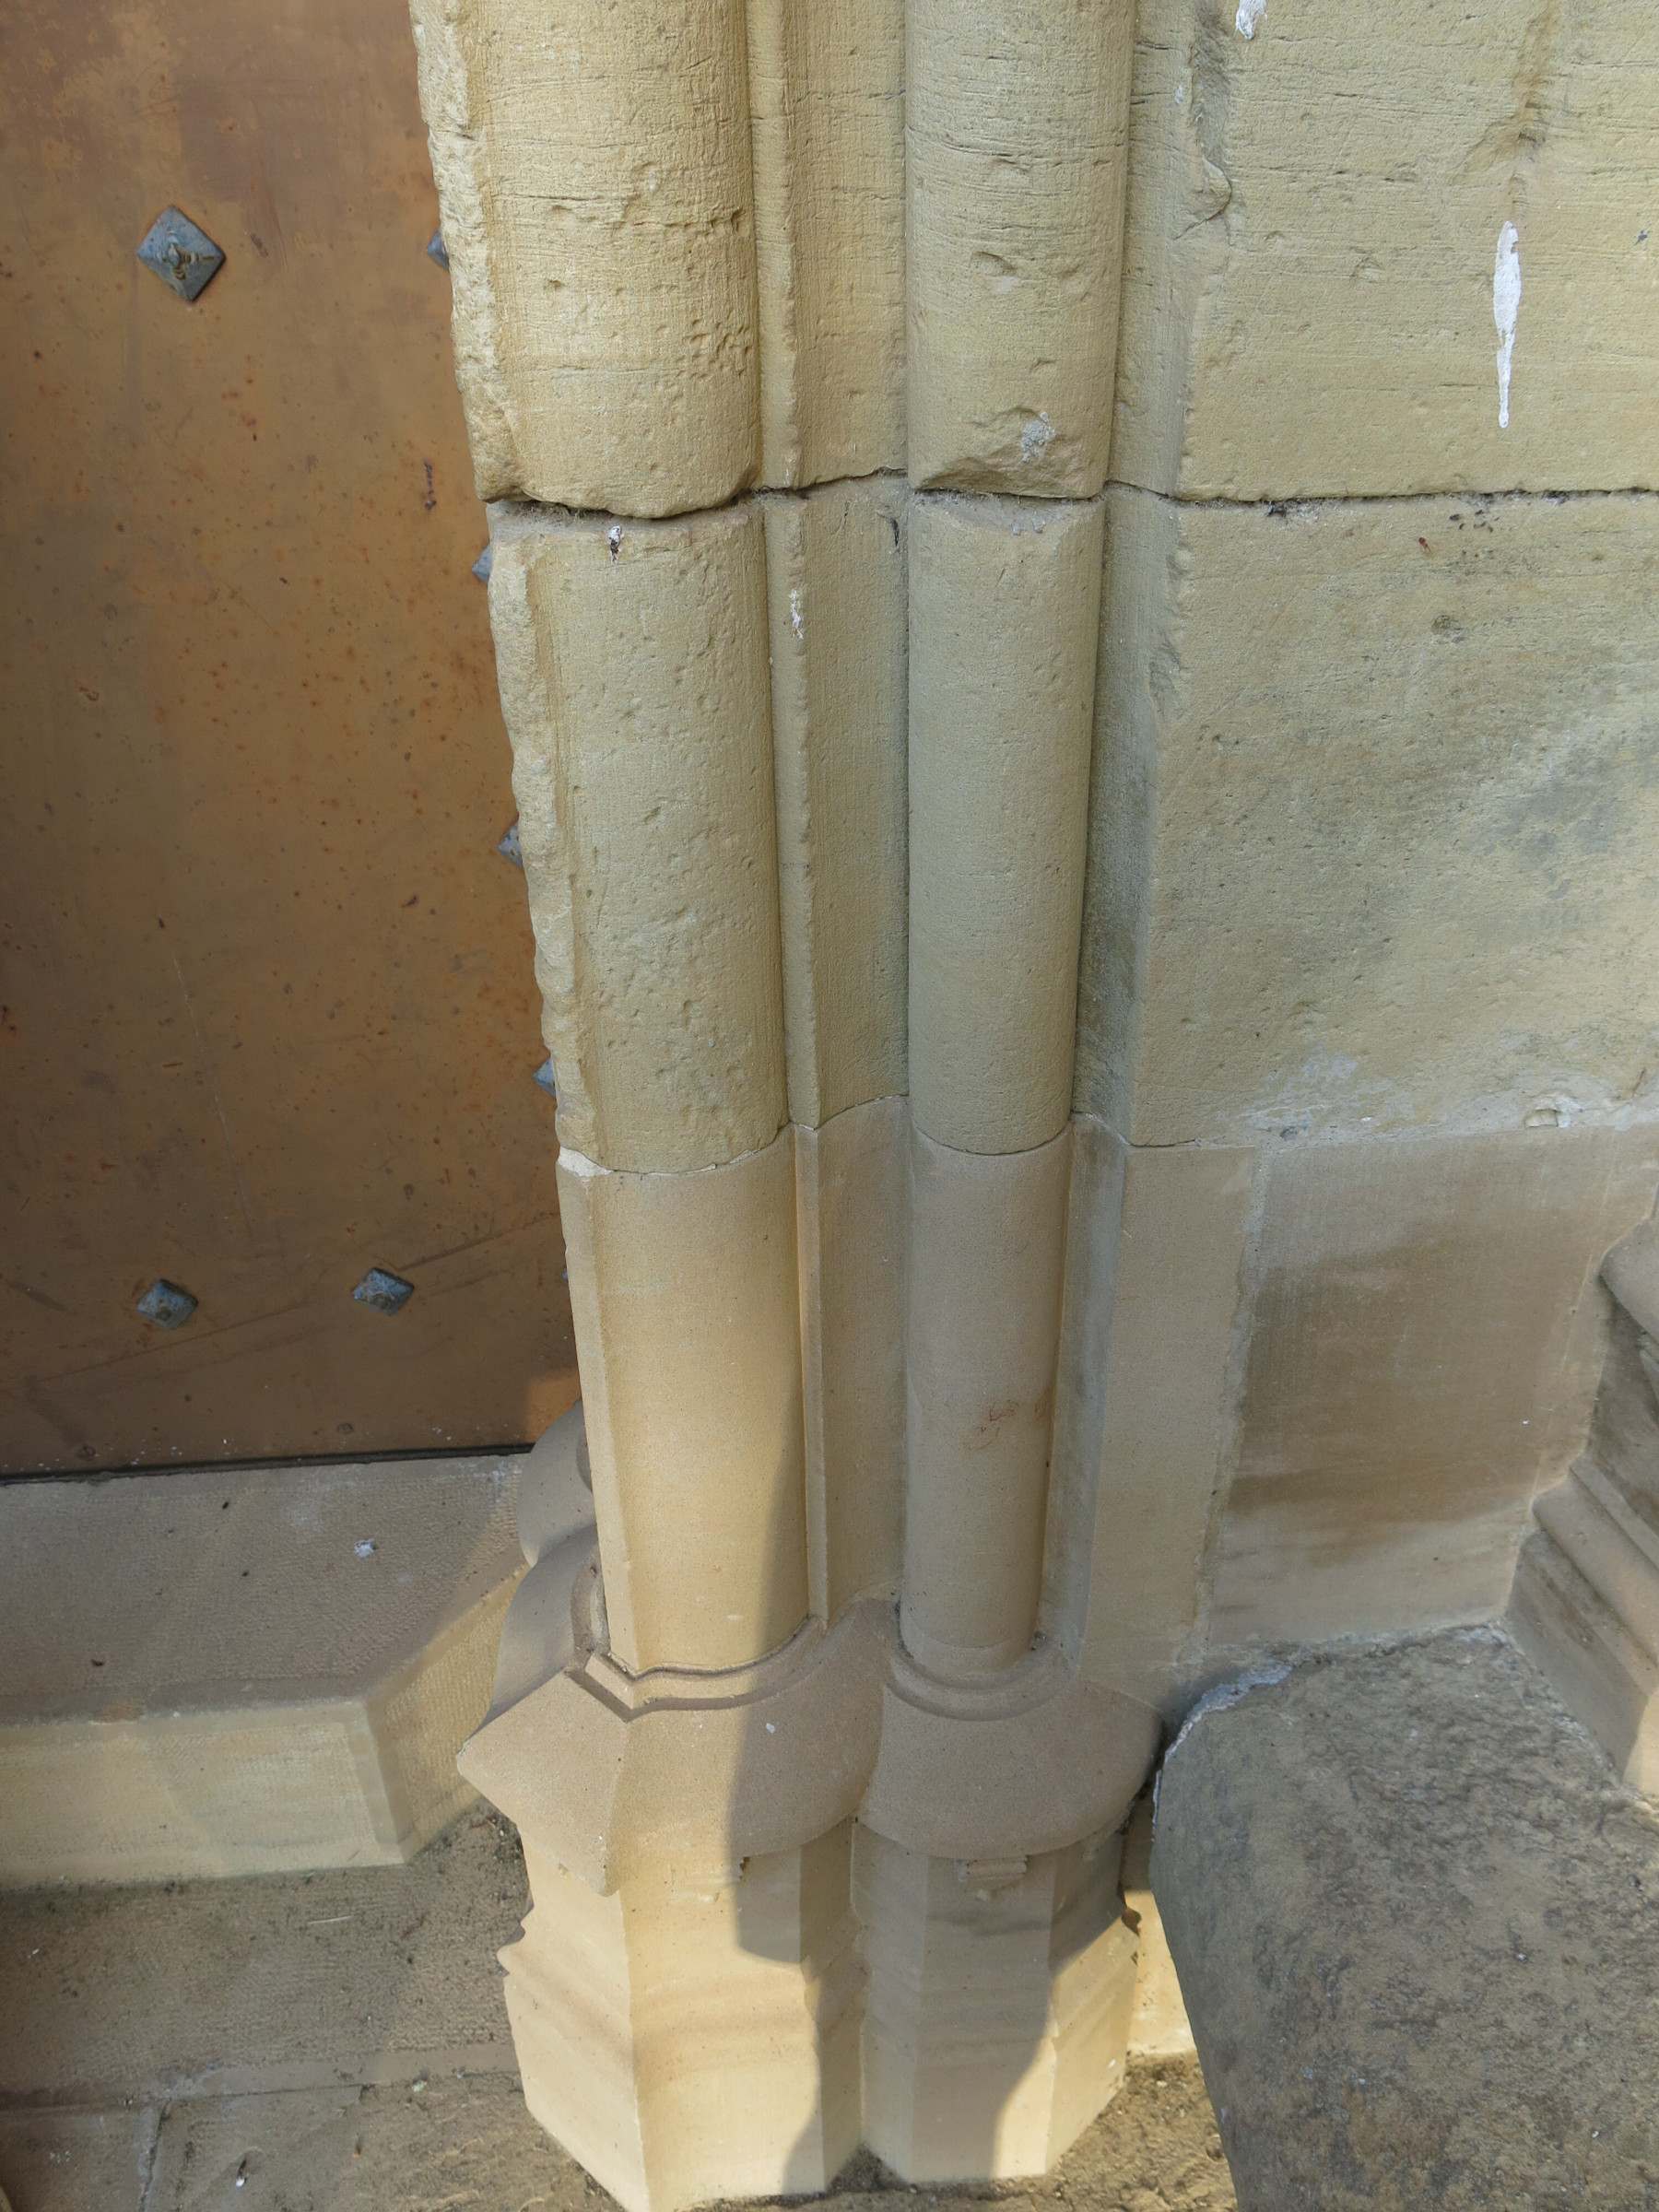 Modern stone replacements on the bottom archway jambs of the stone gothic doorway.